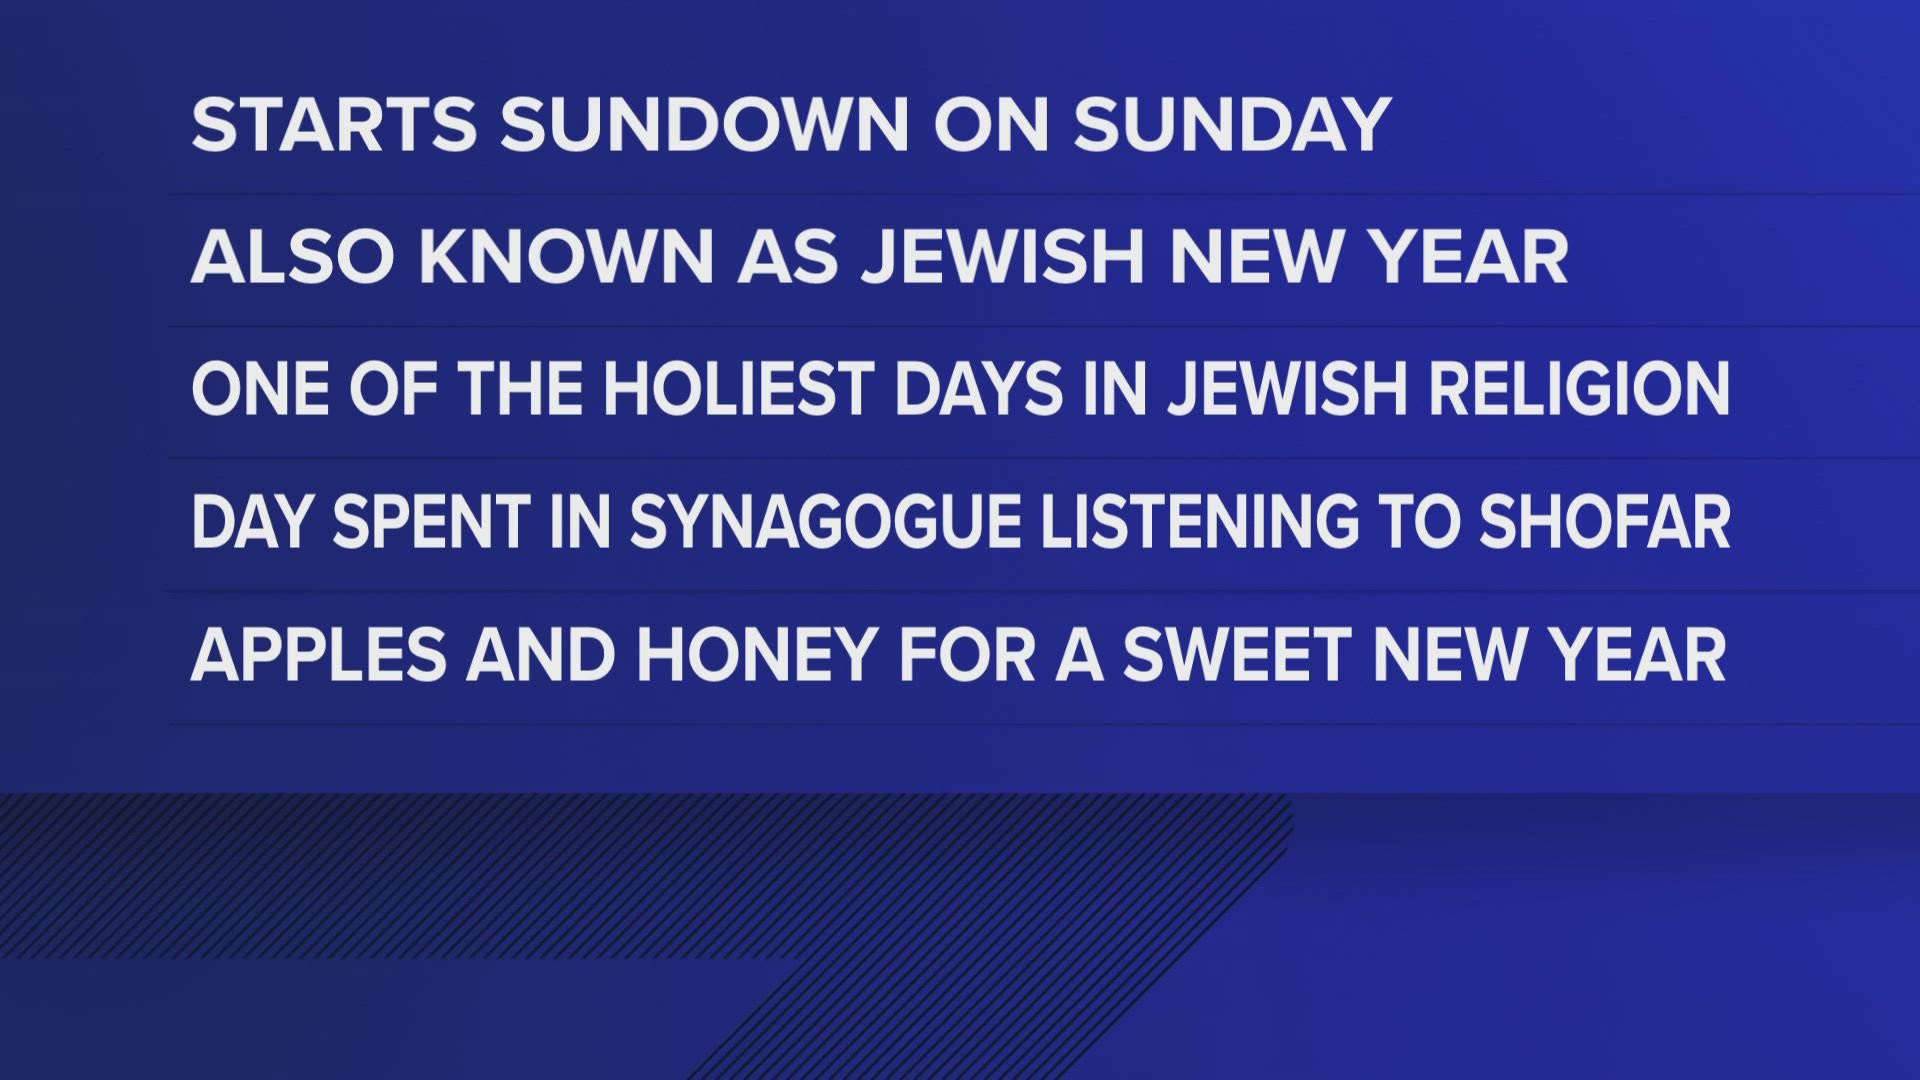 Also known as the "Jewish New Year" the celebration features music, food, and dance.